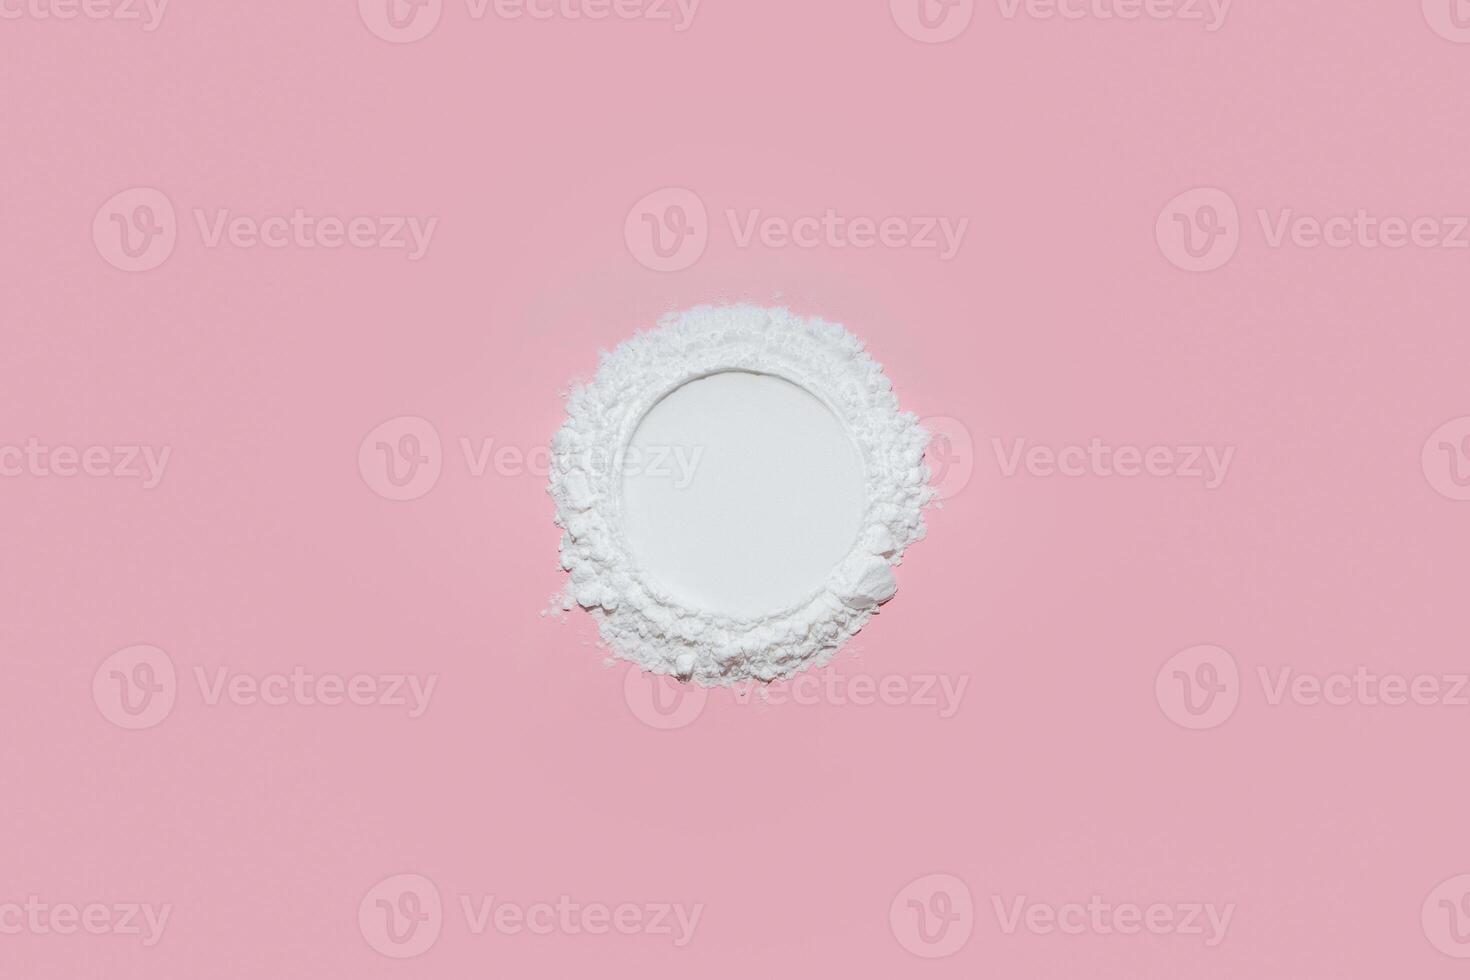 White face powder with empty circle inside on pink background photo